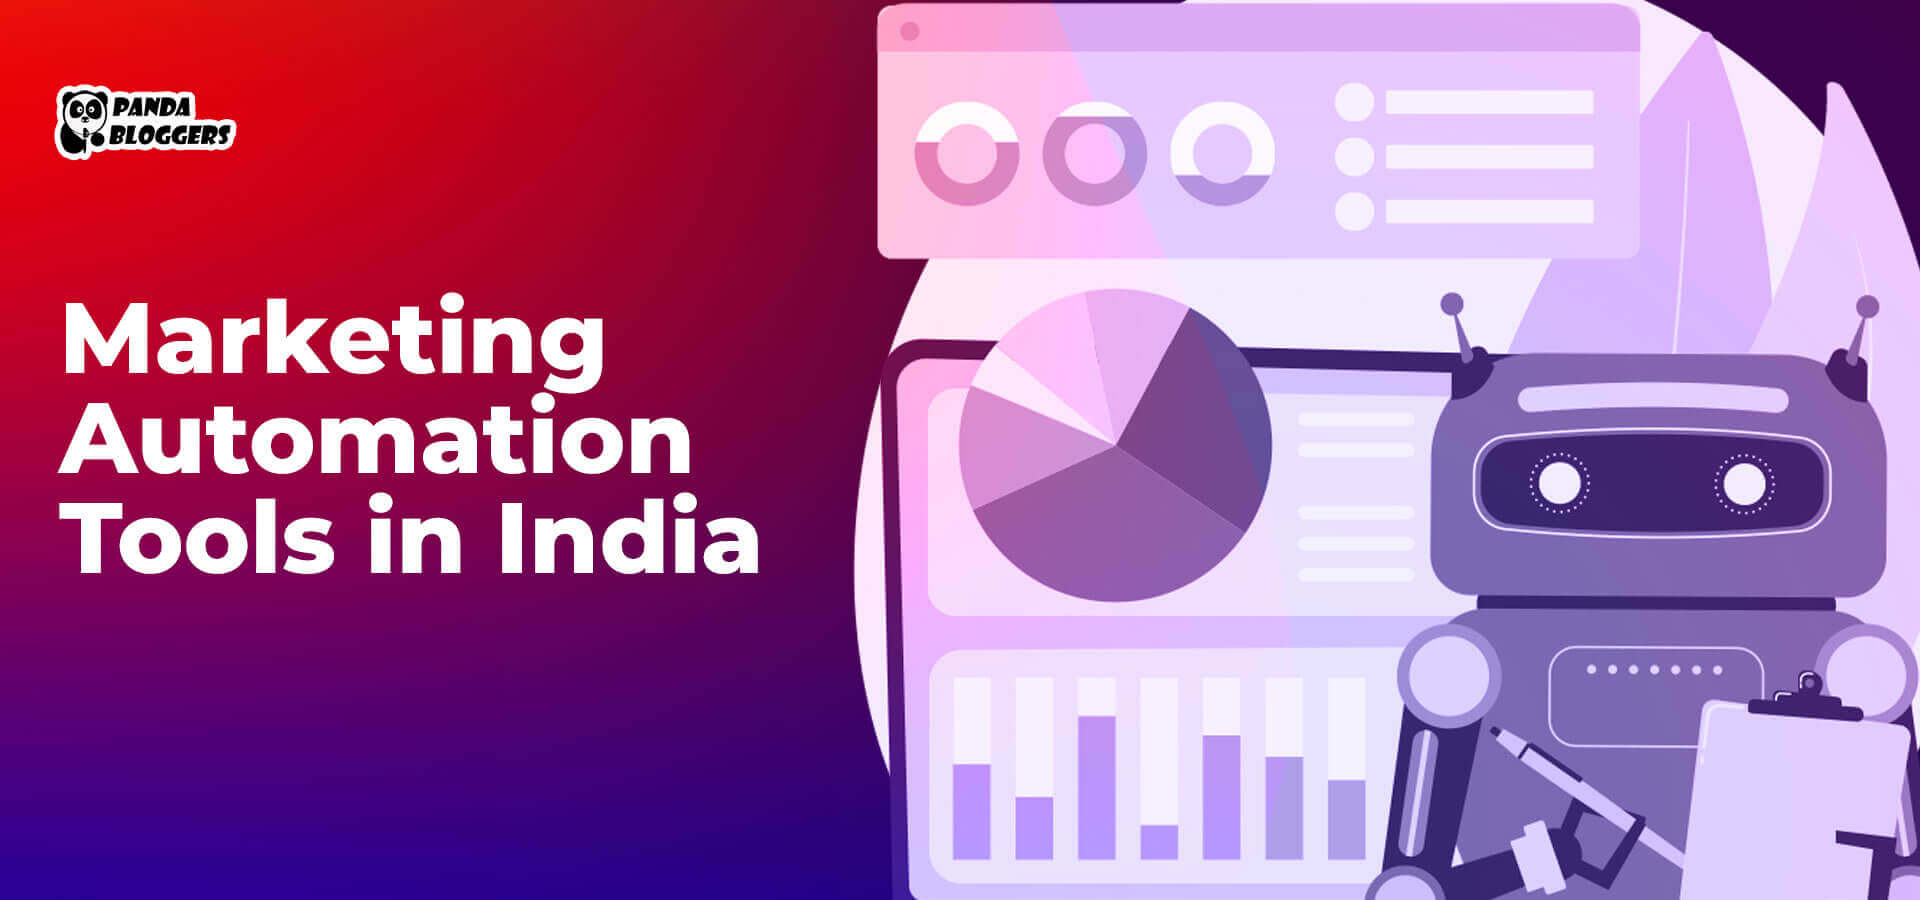 Marketing Automation Tools in India